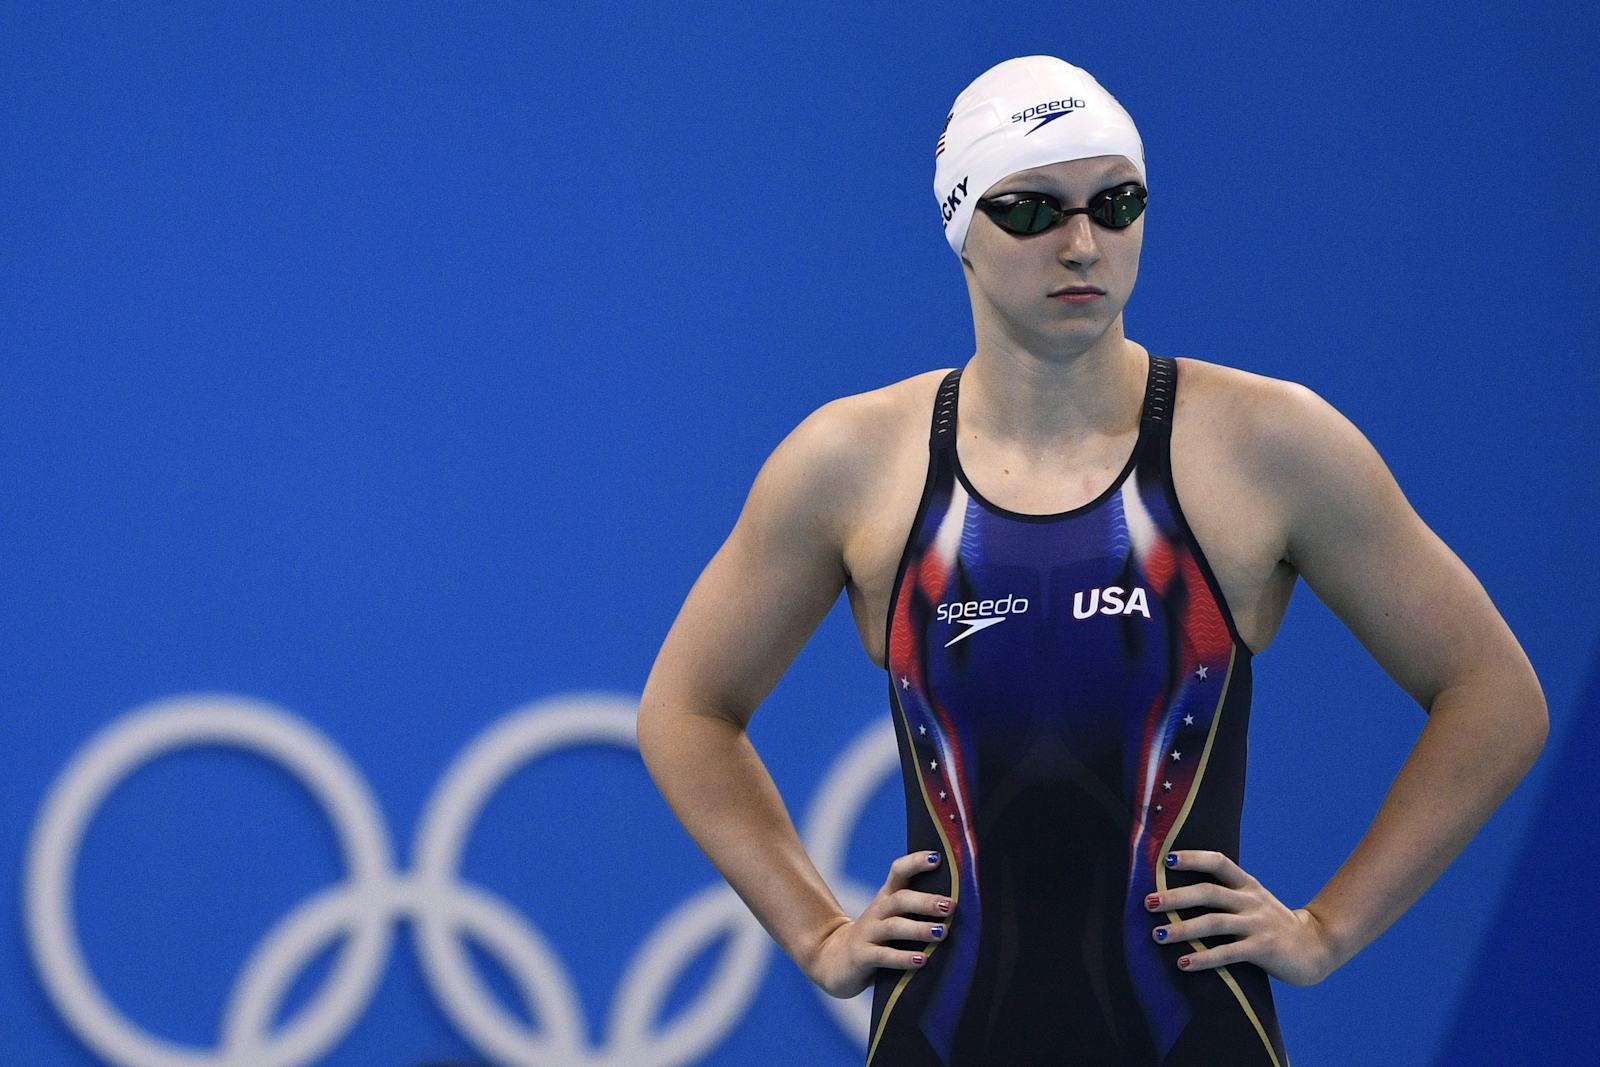 7 Fascinating Facts About Katie Ledecky That Will Make Your Head Swim